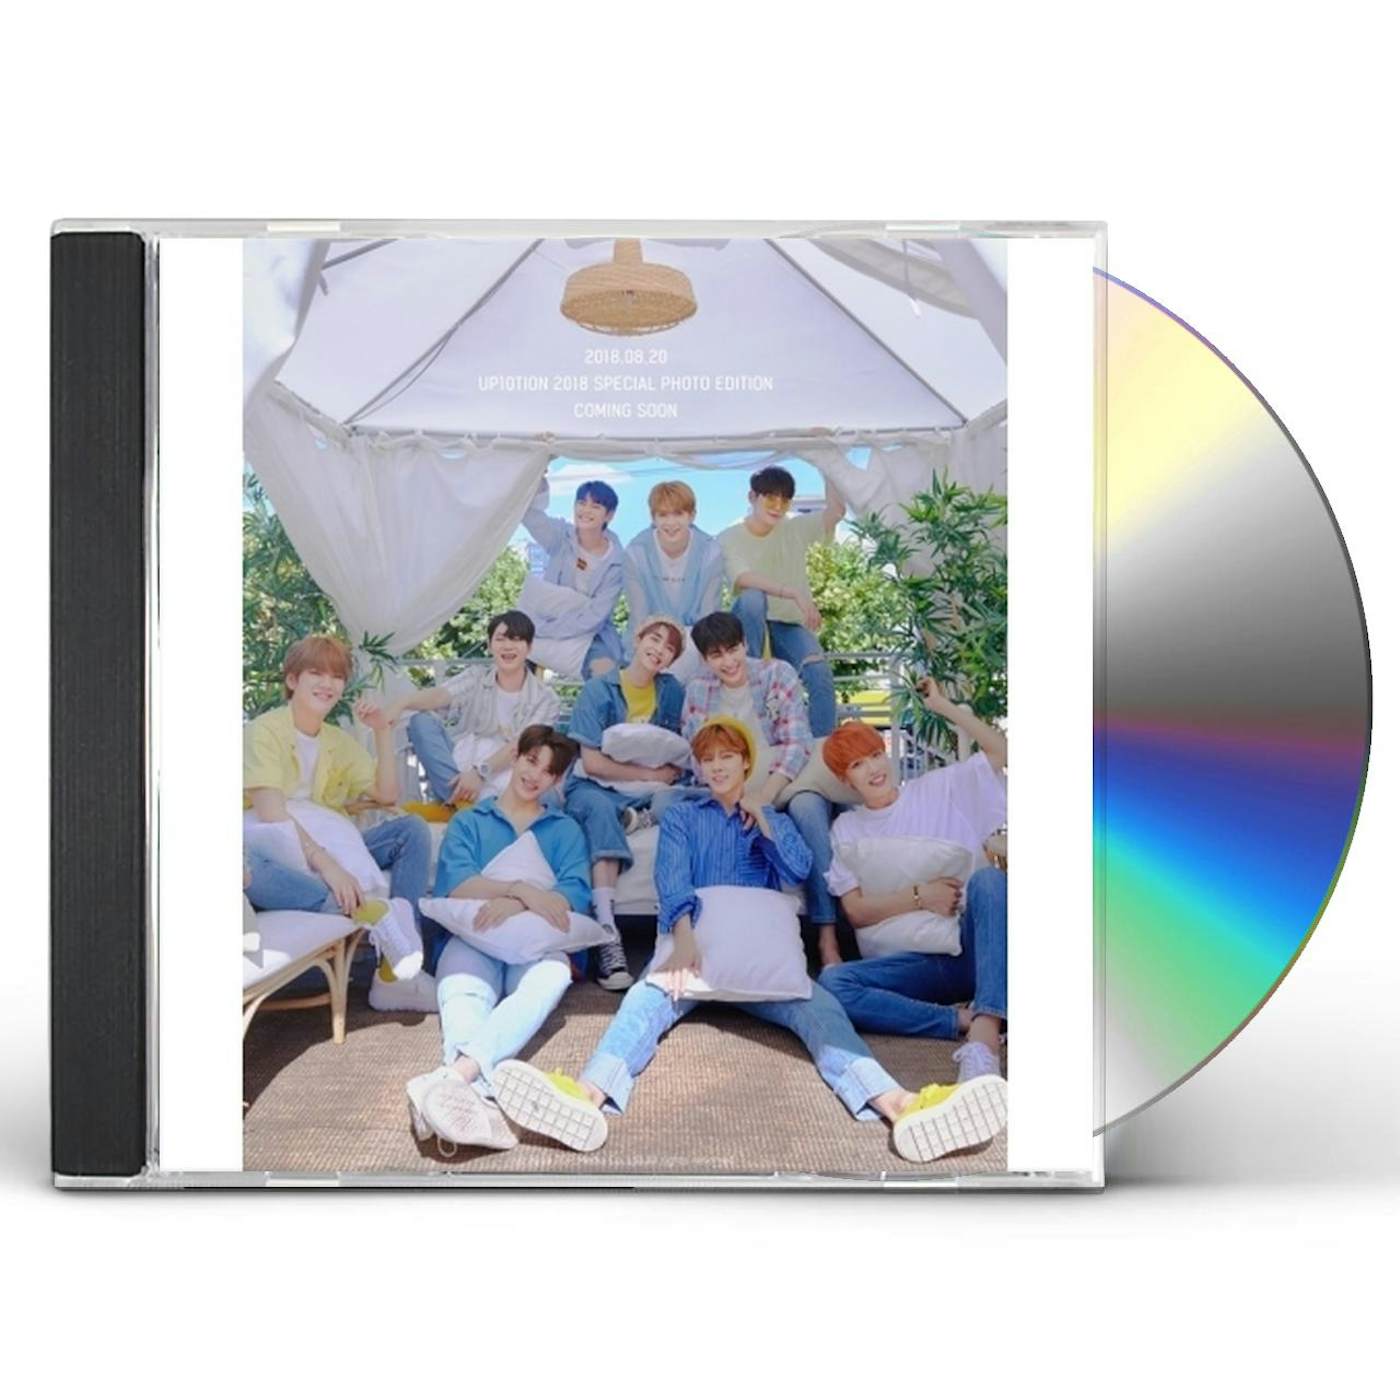 UP10TION 2018 SPECIAL PHOTO EDITION CD